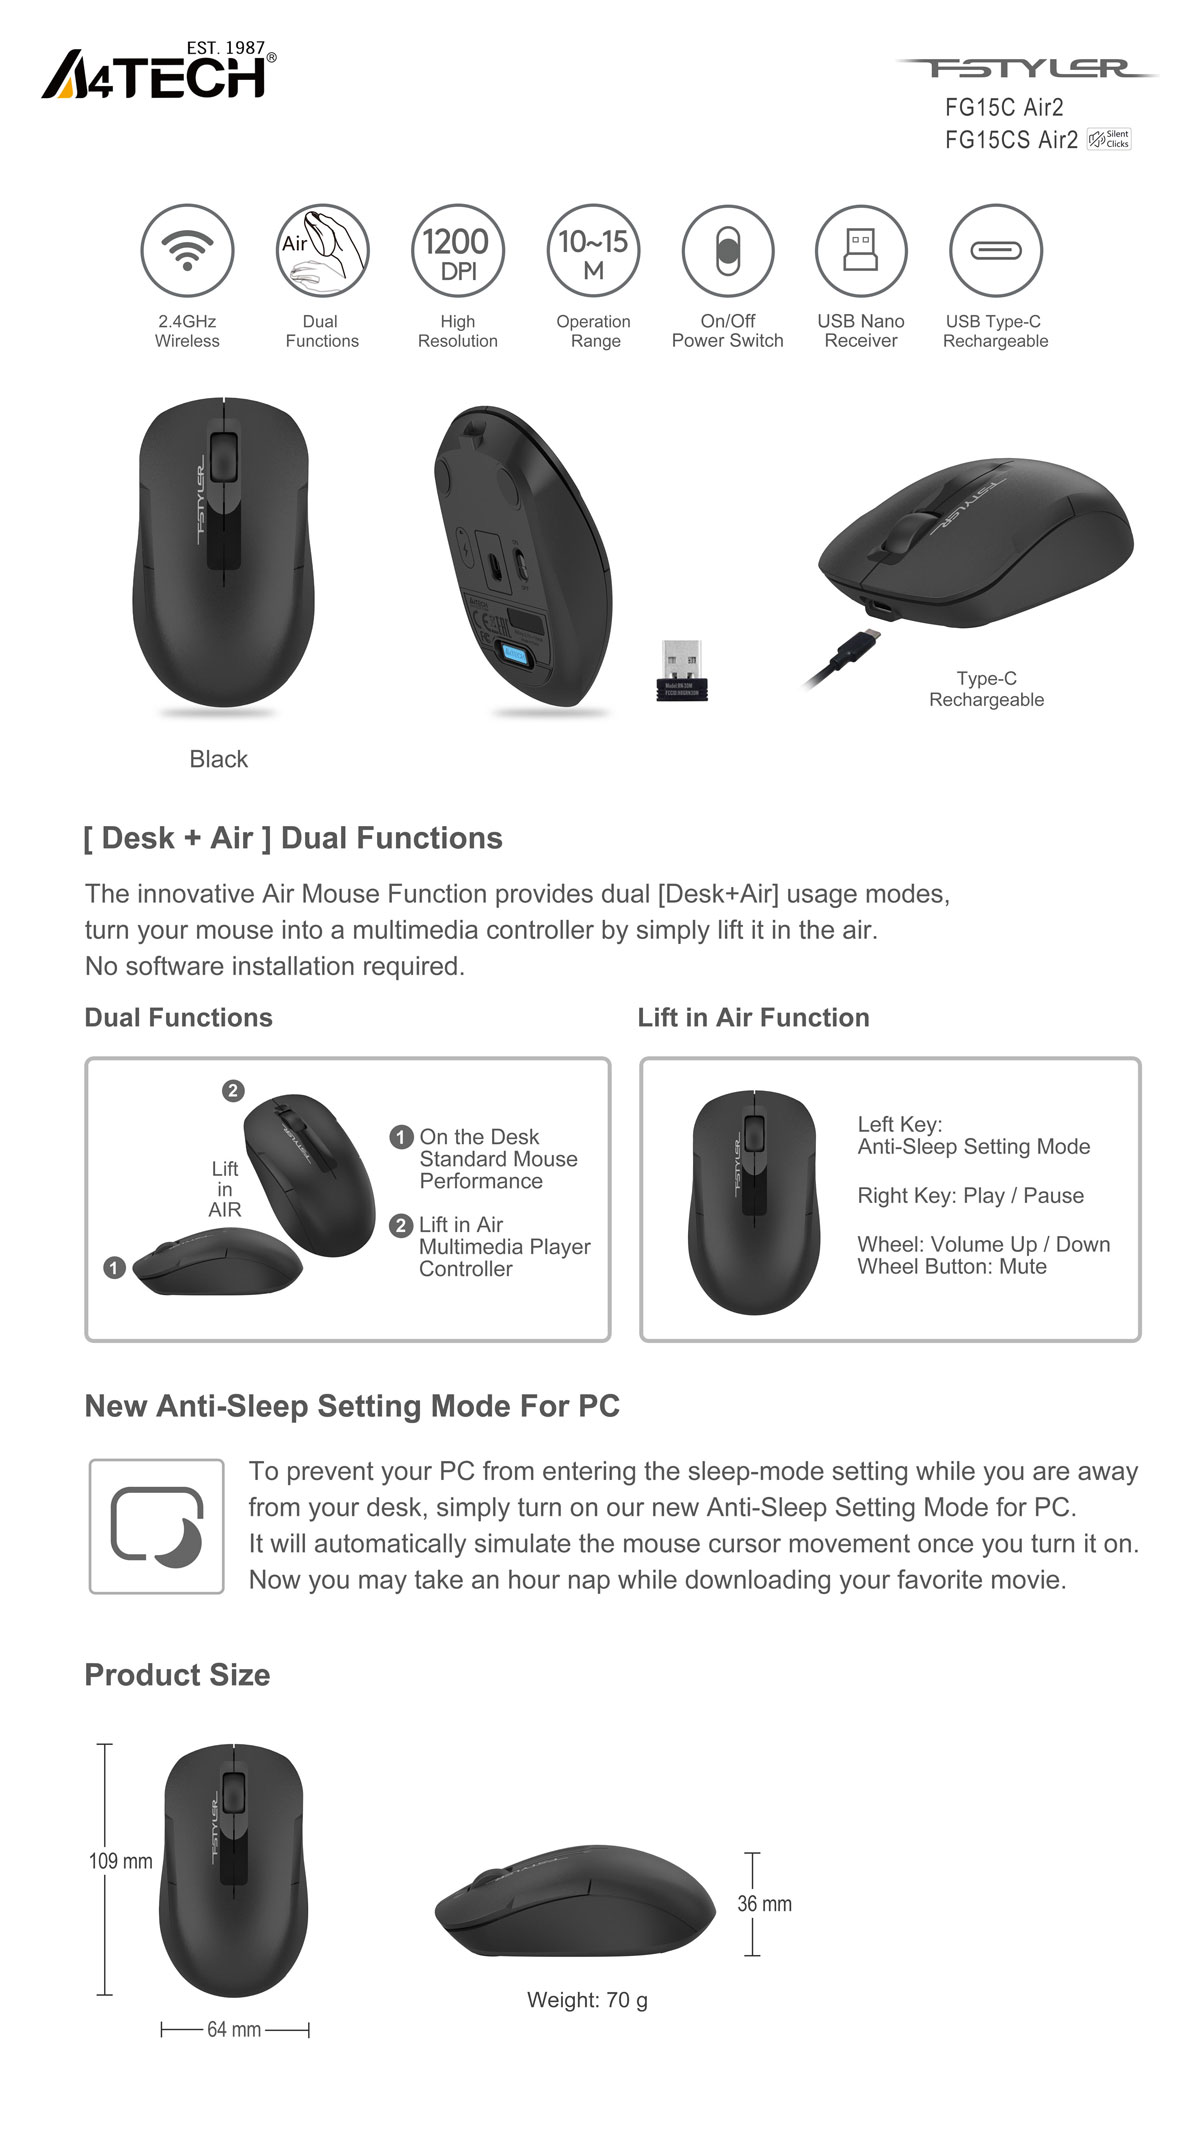 A4tech Fstyler FG15C Air2 Wireless Rechargeable Dual-Function Air Mouse Price in Bangladesh